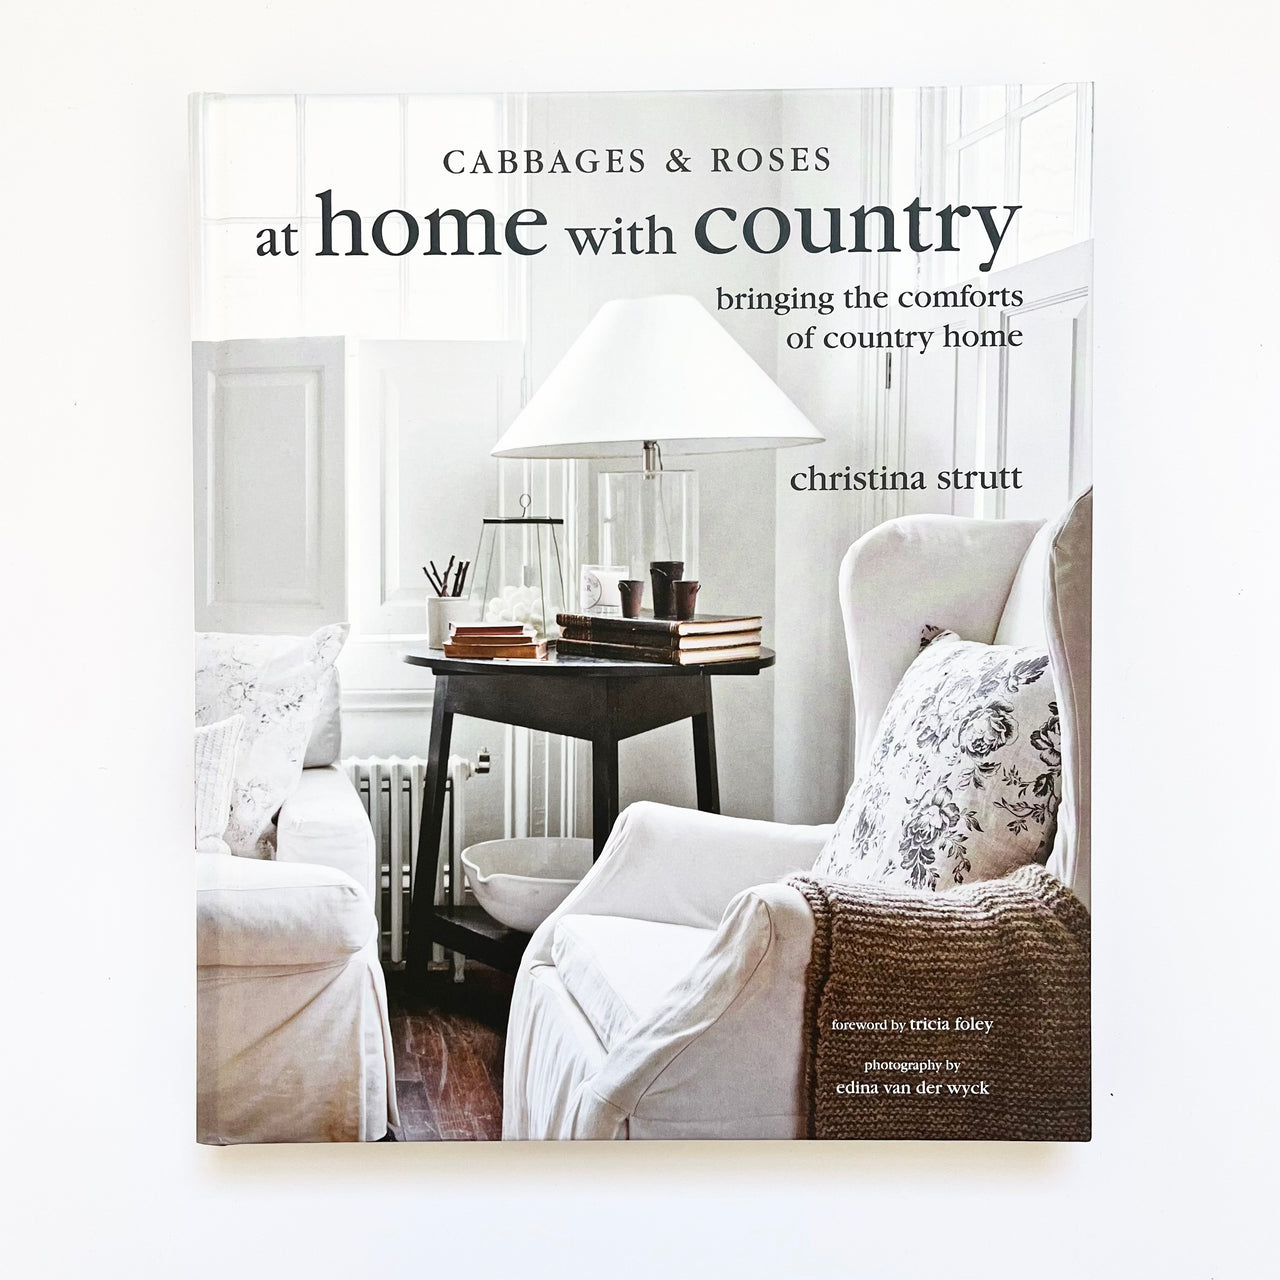 At Home With Country hardcover book by Christina Strutt. Australian Art Prints and Homewares. Green Door Decor. www.greendoordecor.com.au